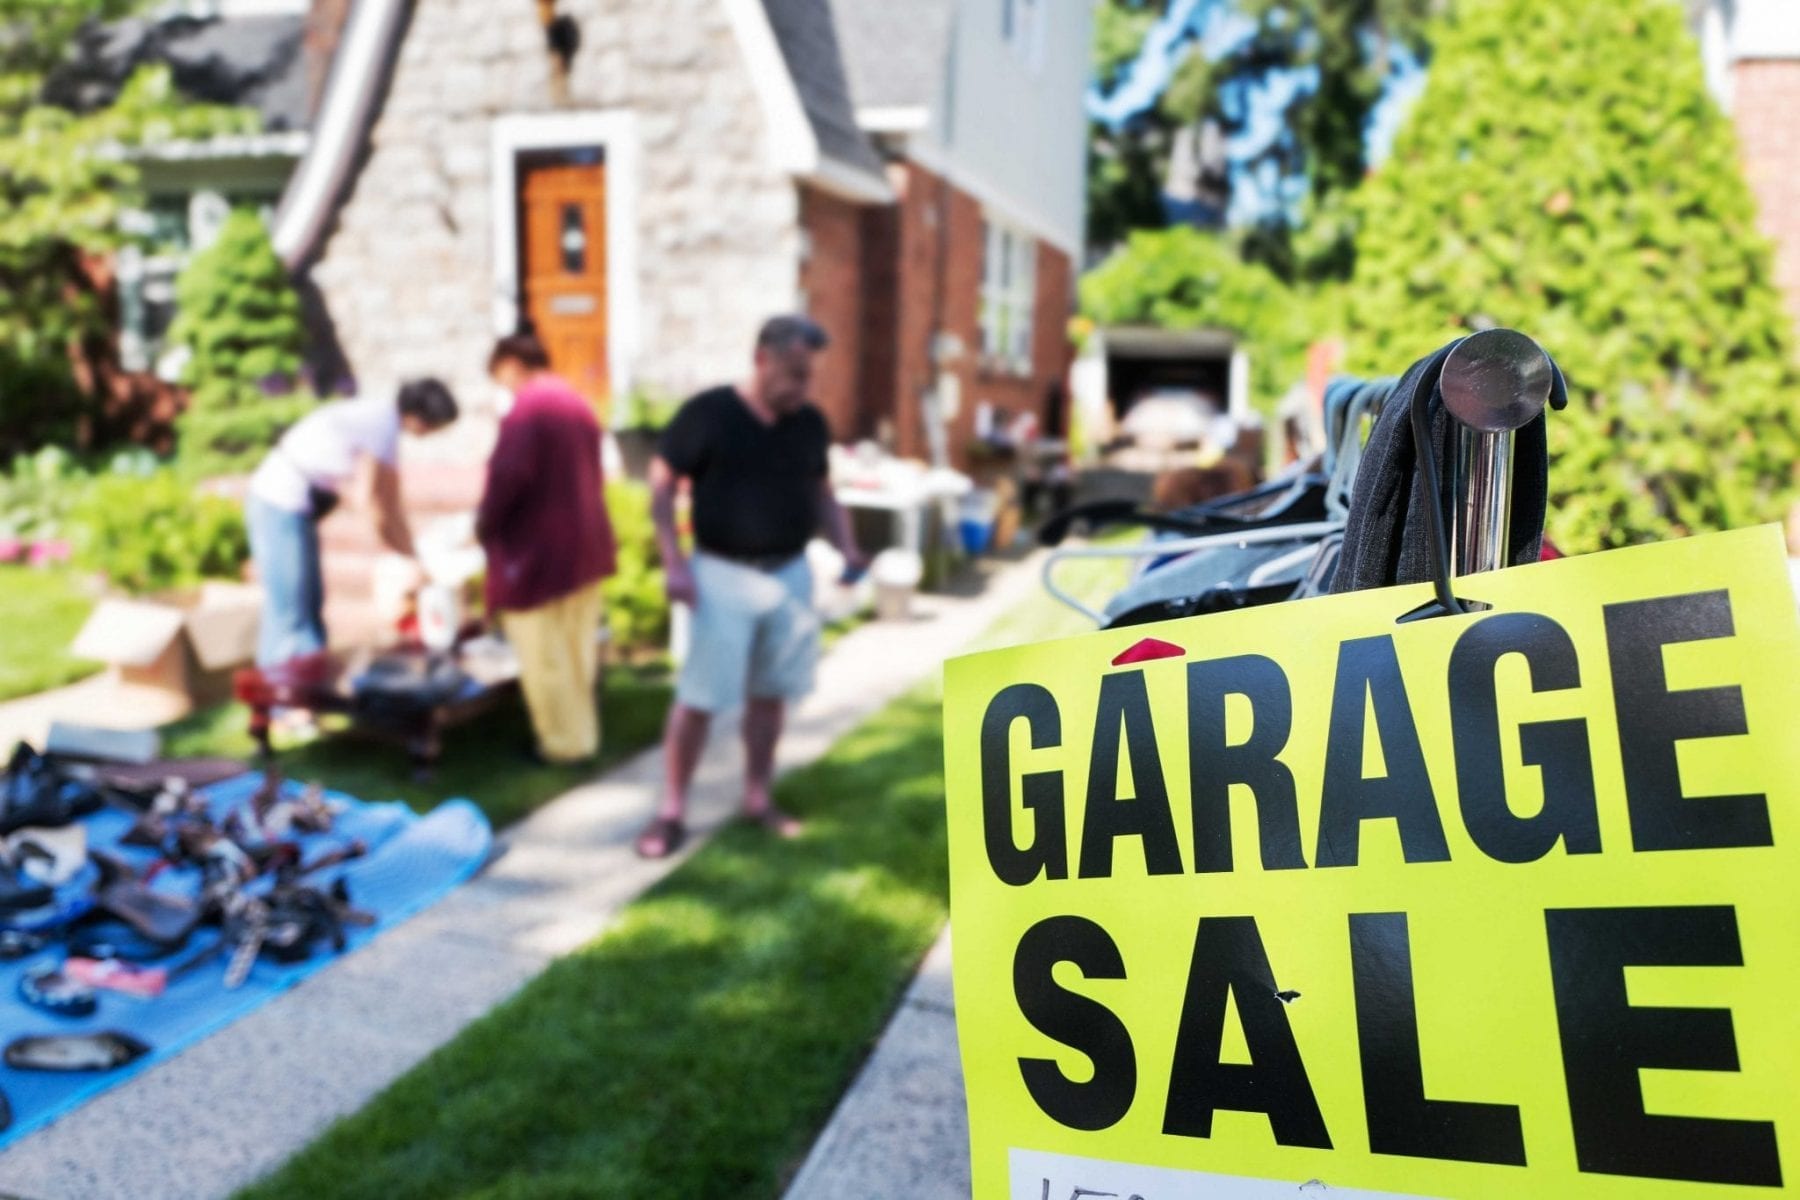 People at garage sale outside with sign up front